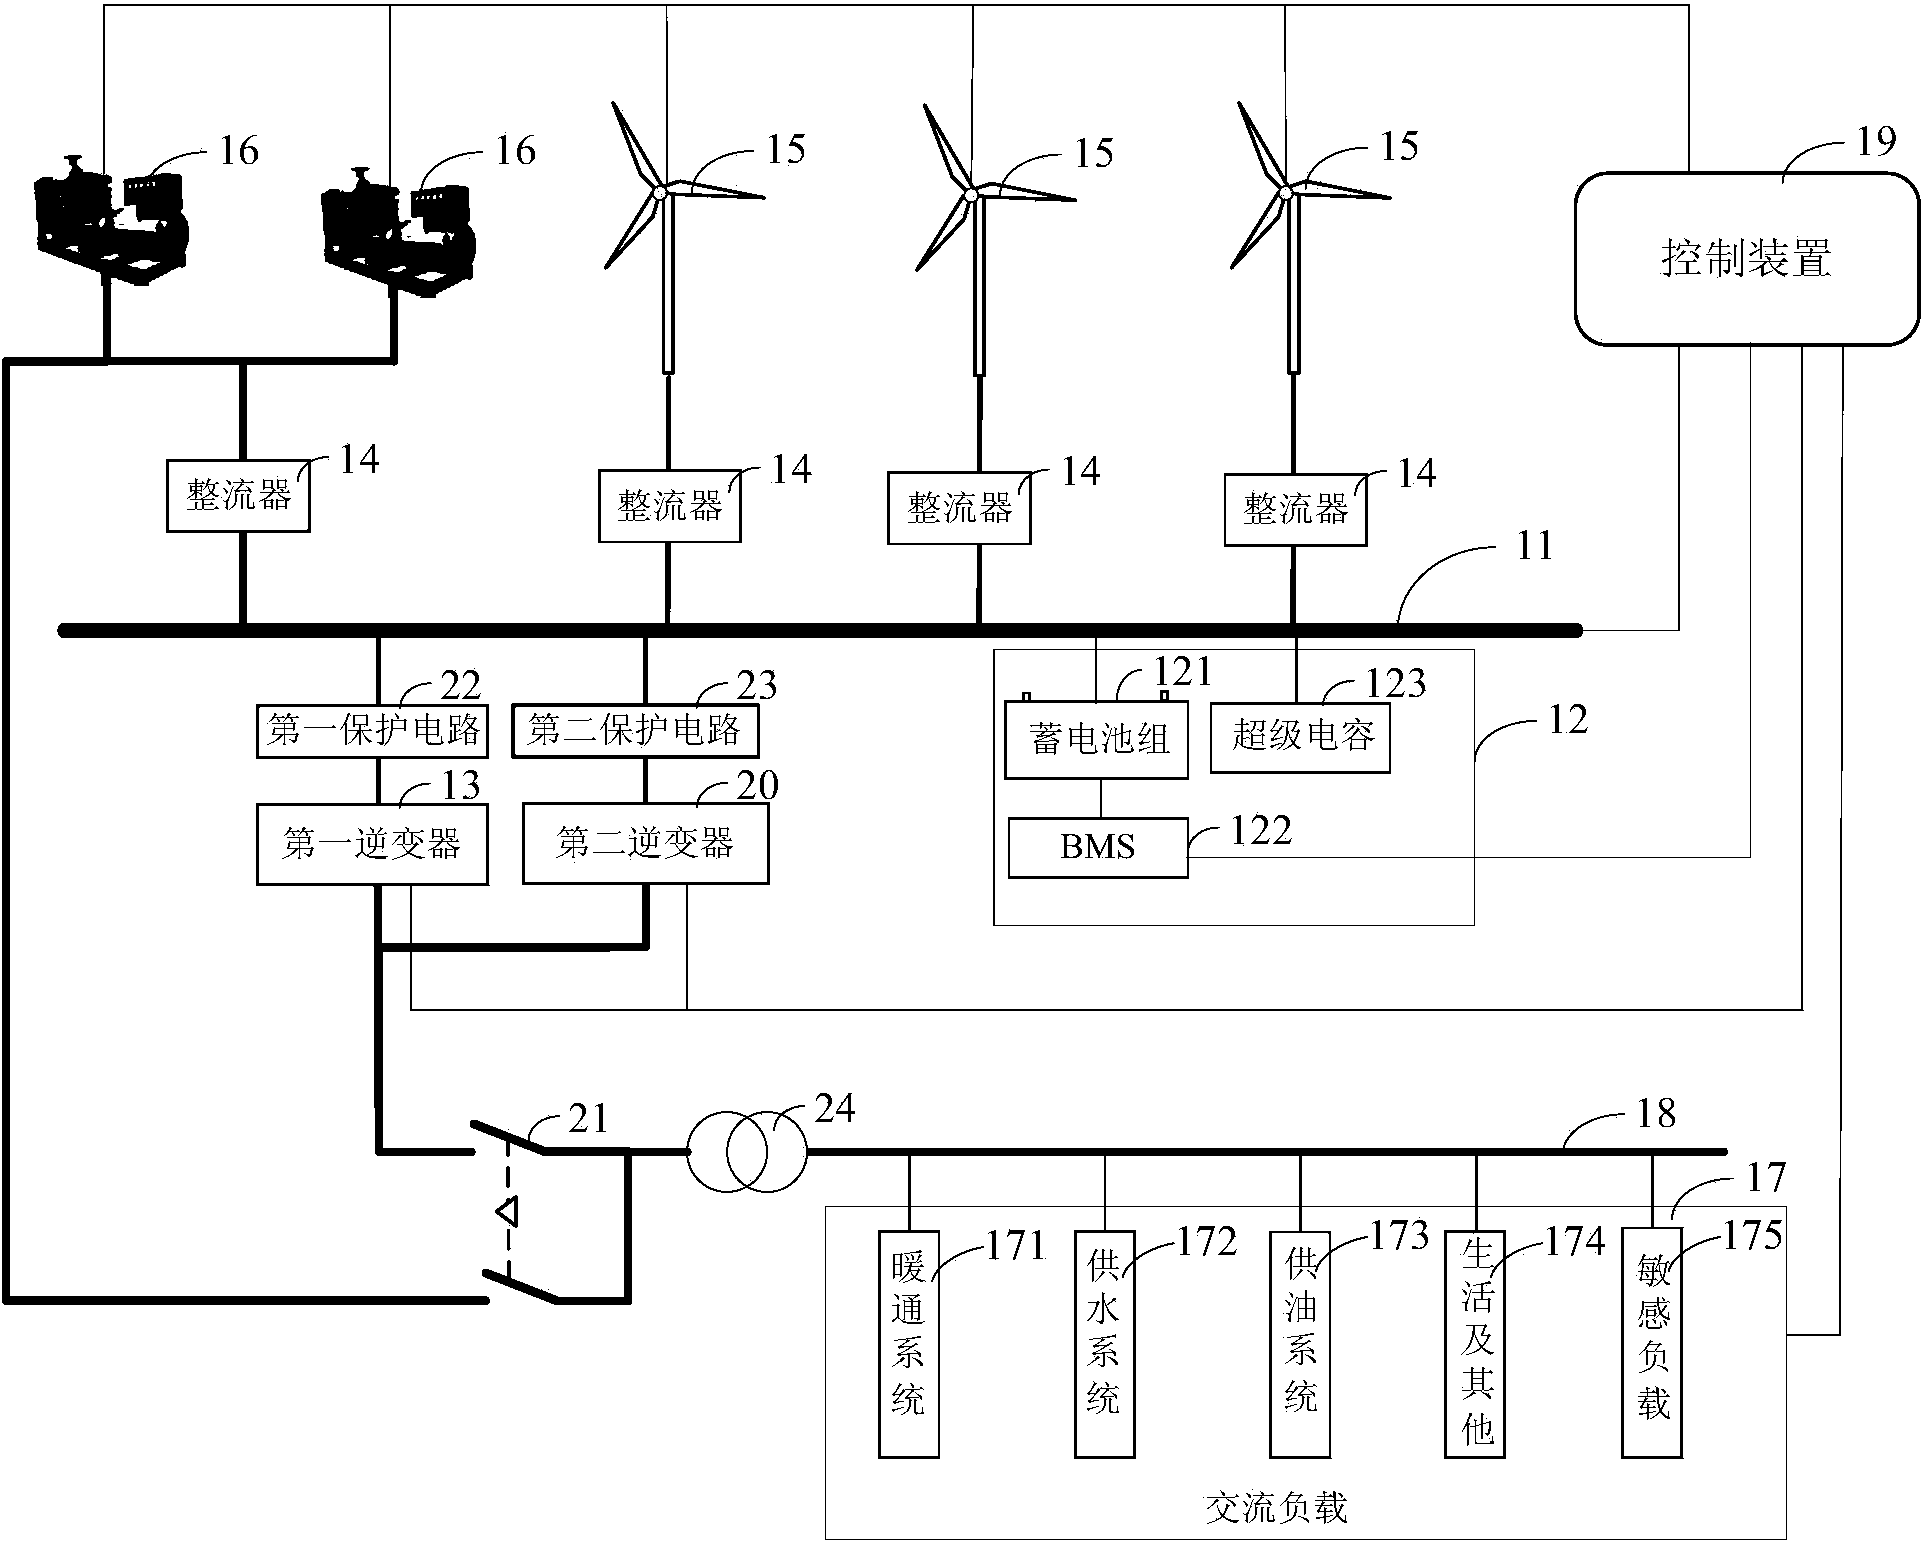 Micro power grid system